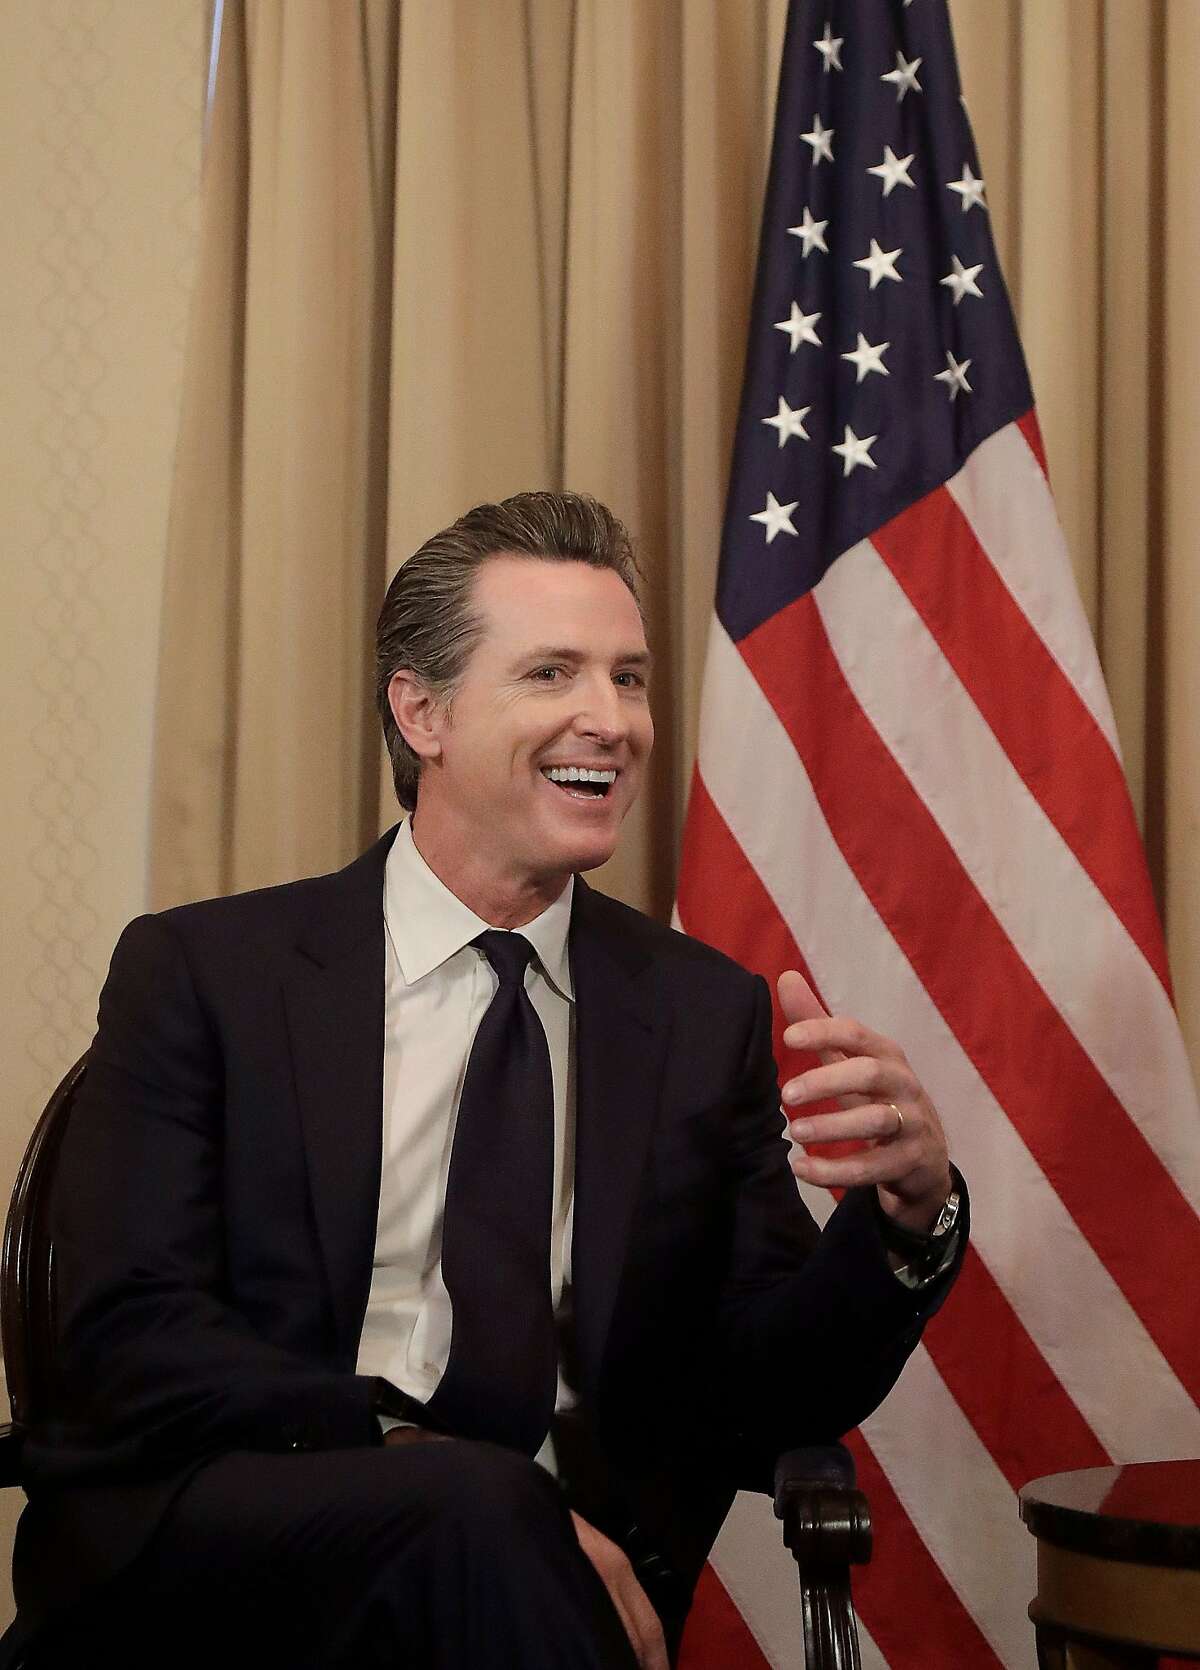 SAN FRANCISCO, CA - FEBRUARY 9: California Lieutenant Governor Gavin Newsom smile while meeting with Canada's Prime Minister Justin Trudeau on February 9, 2018 in San Francisco, California. Trudeau is in California to discuss the North American Free Trade Agreement and to promote Canada to technology firms. (Photo by Jeff Chiu-Pool/Getty Images)